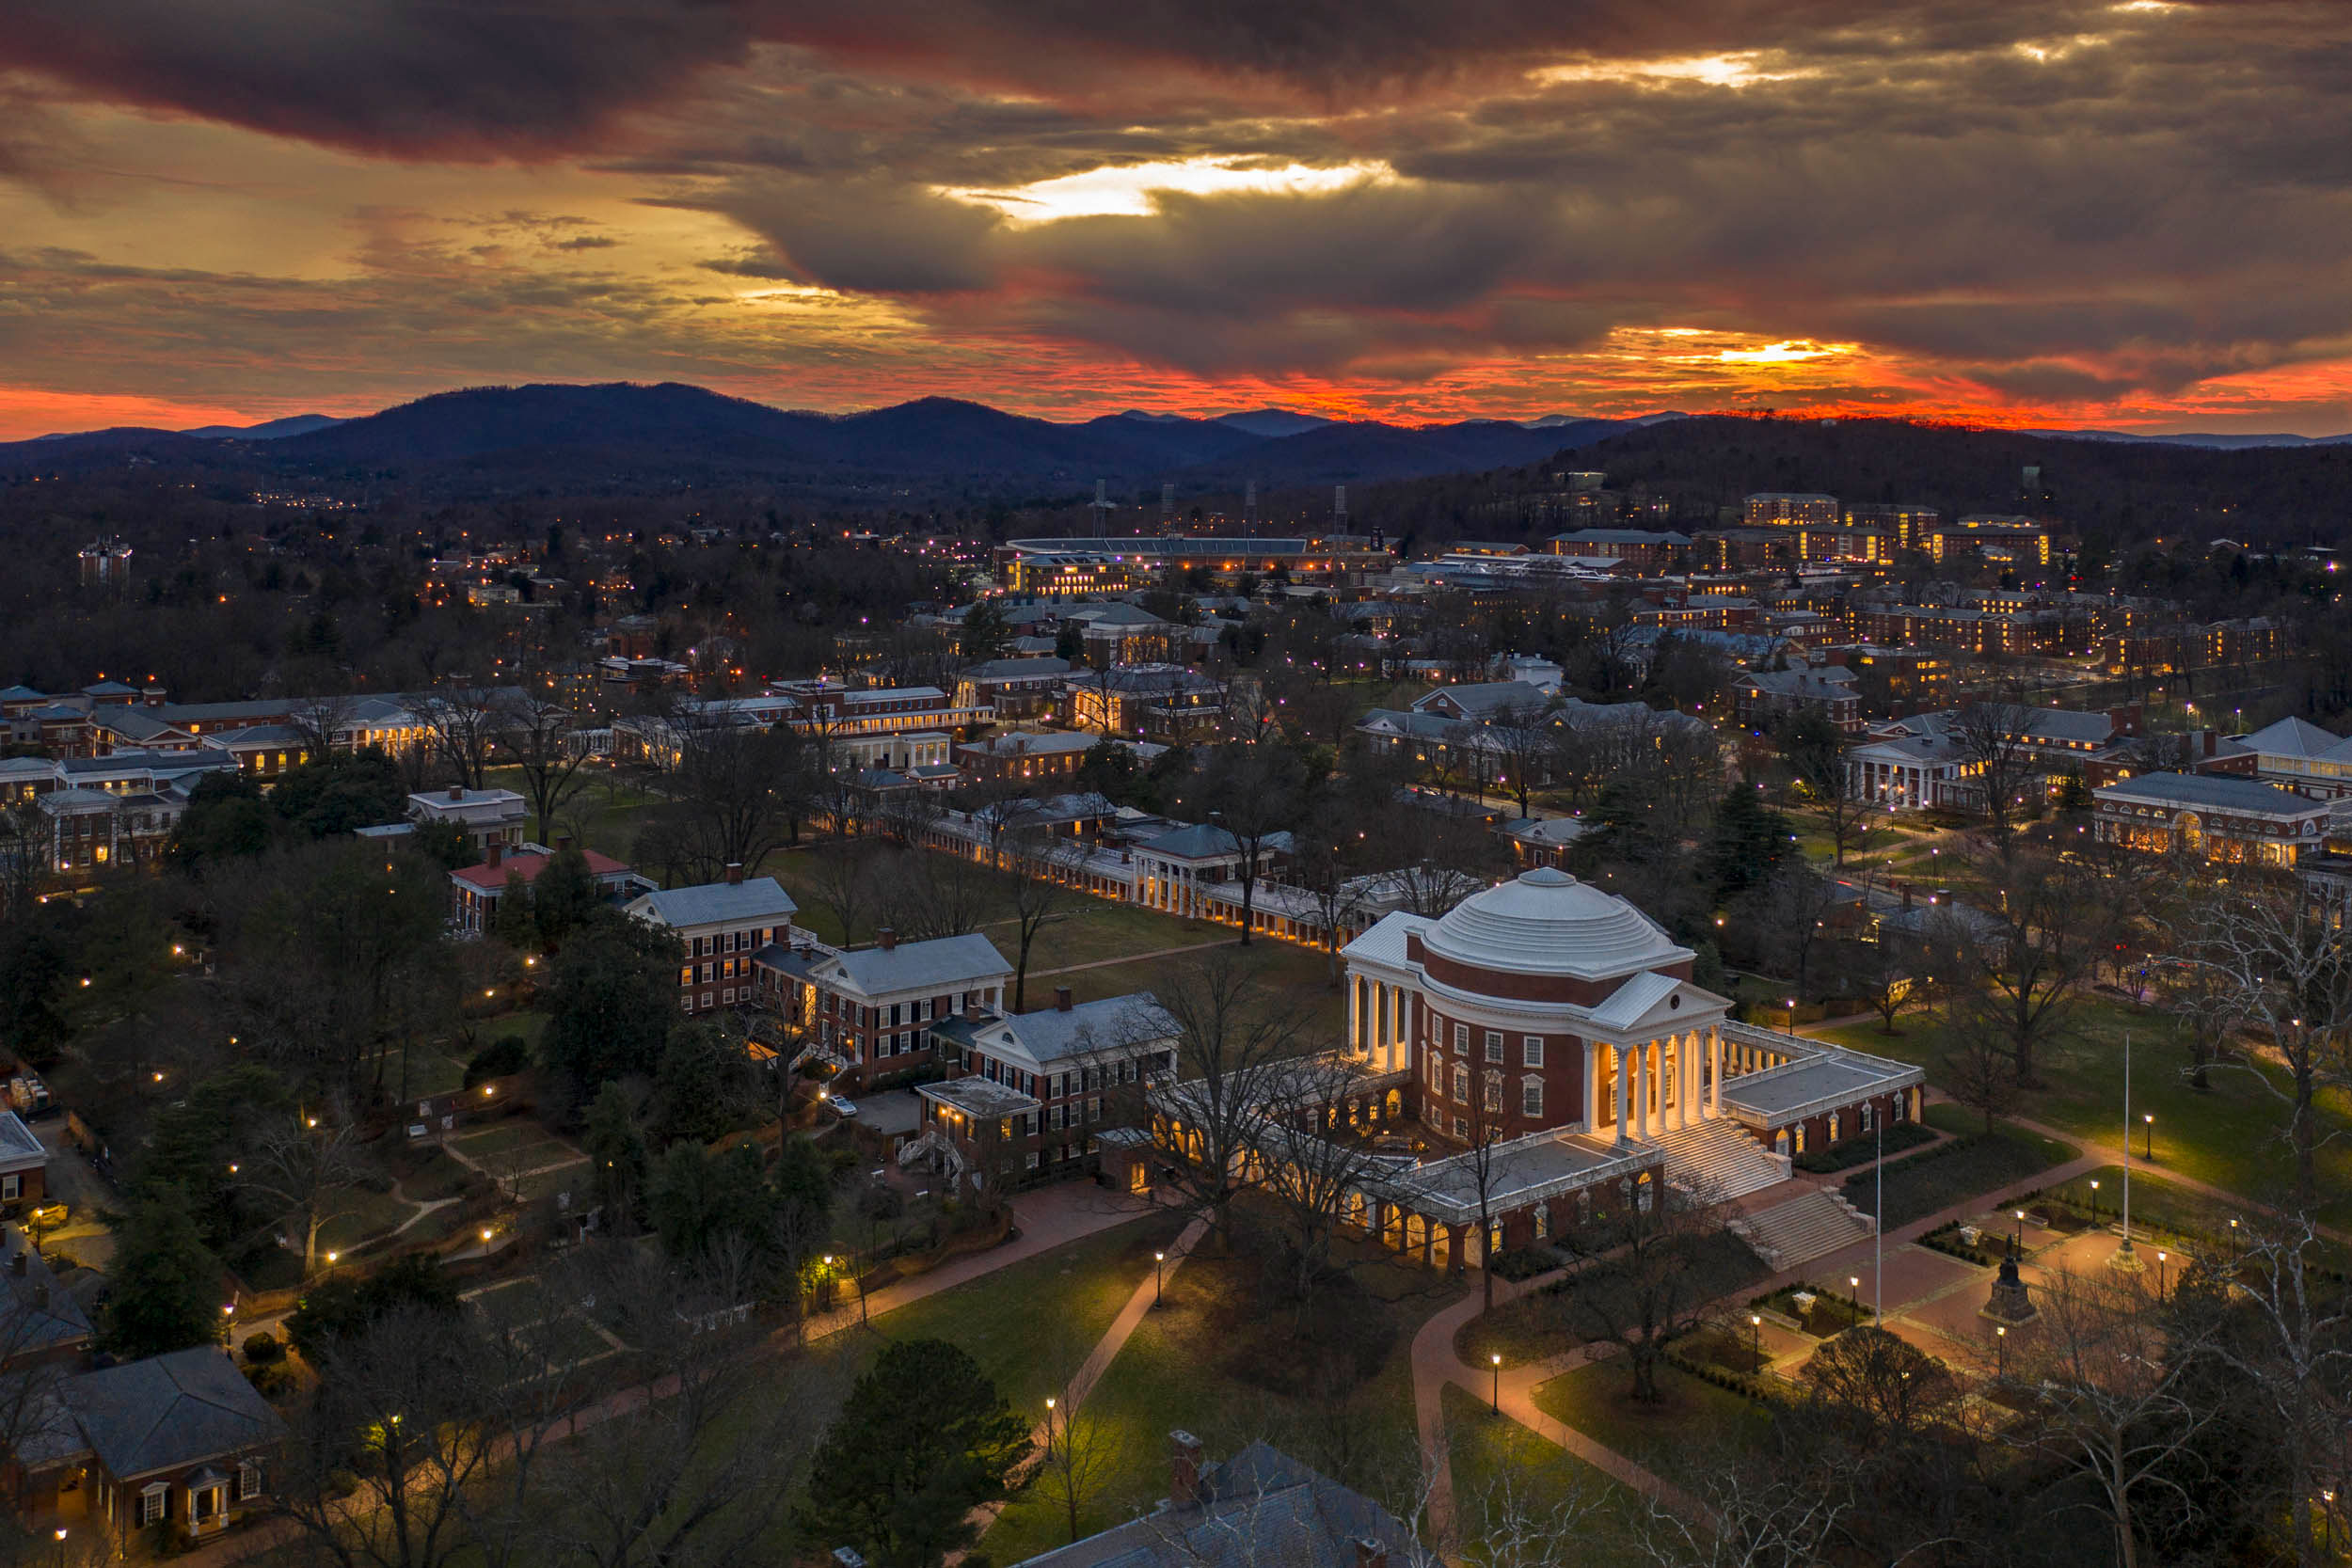 Aerial view of the Rotunda an Charlottesville at dusk with lights on